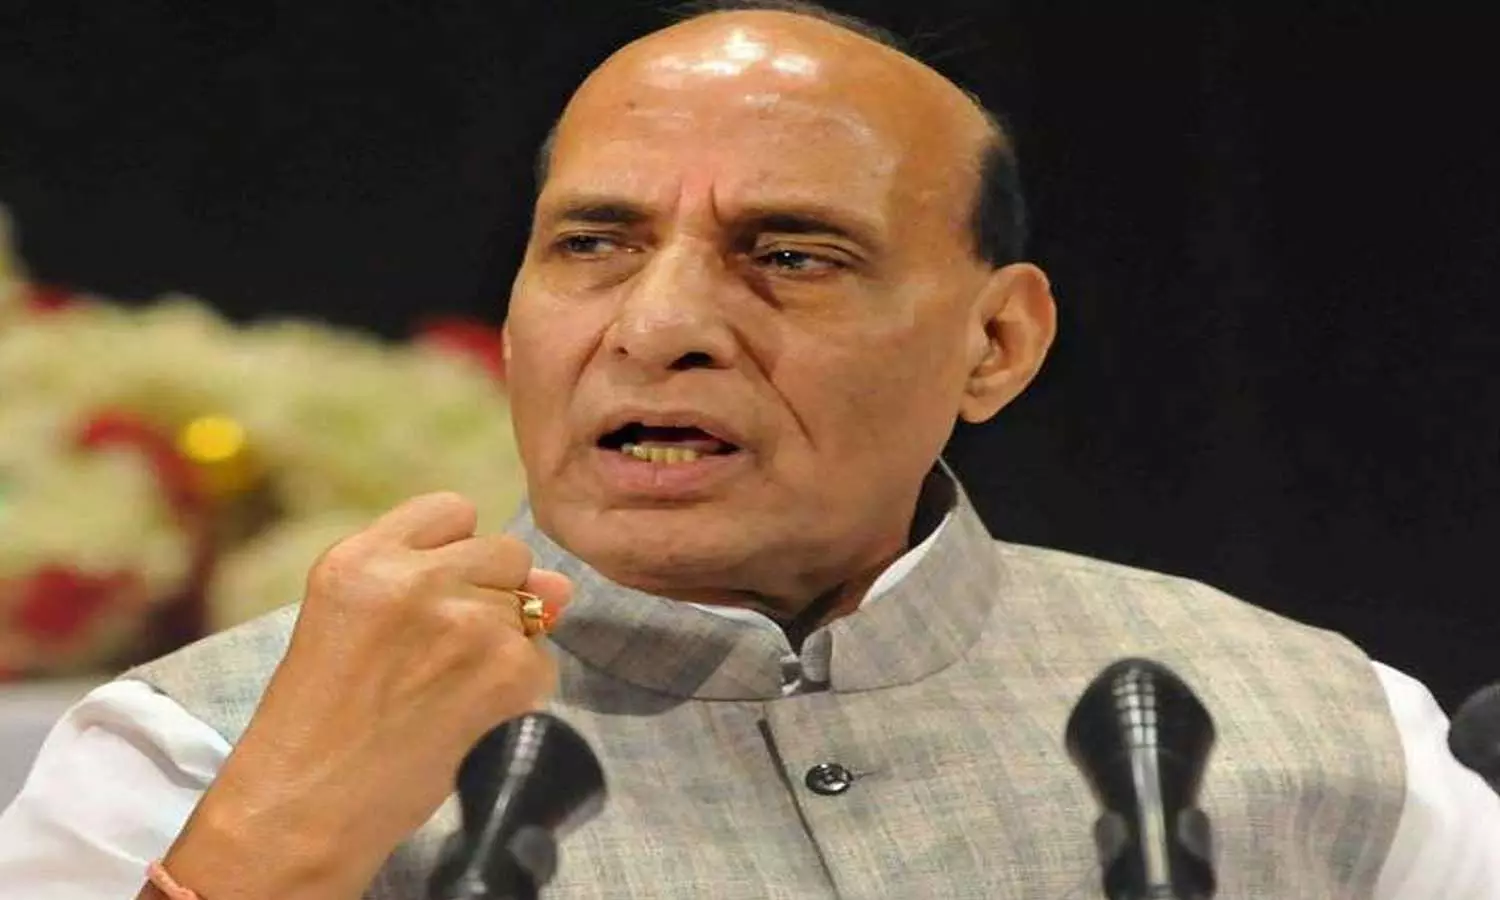 Pakistan furious over Defense Minister Rajnath Singhs statement about naming missiles, said - unfair and provocative